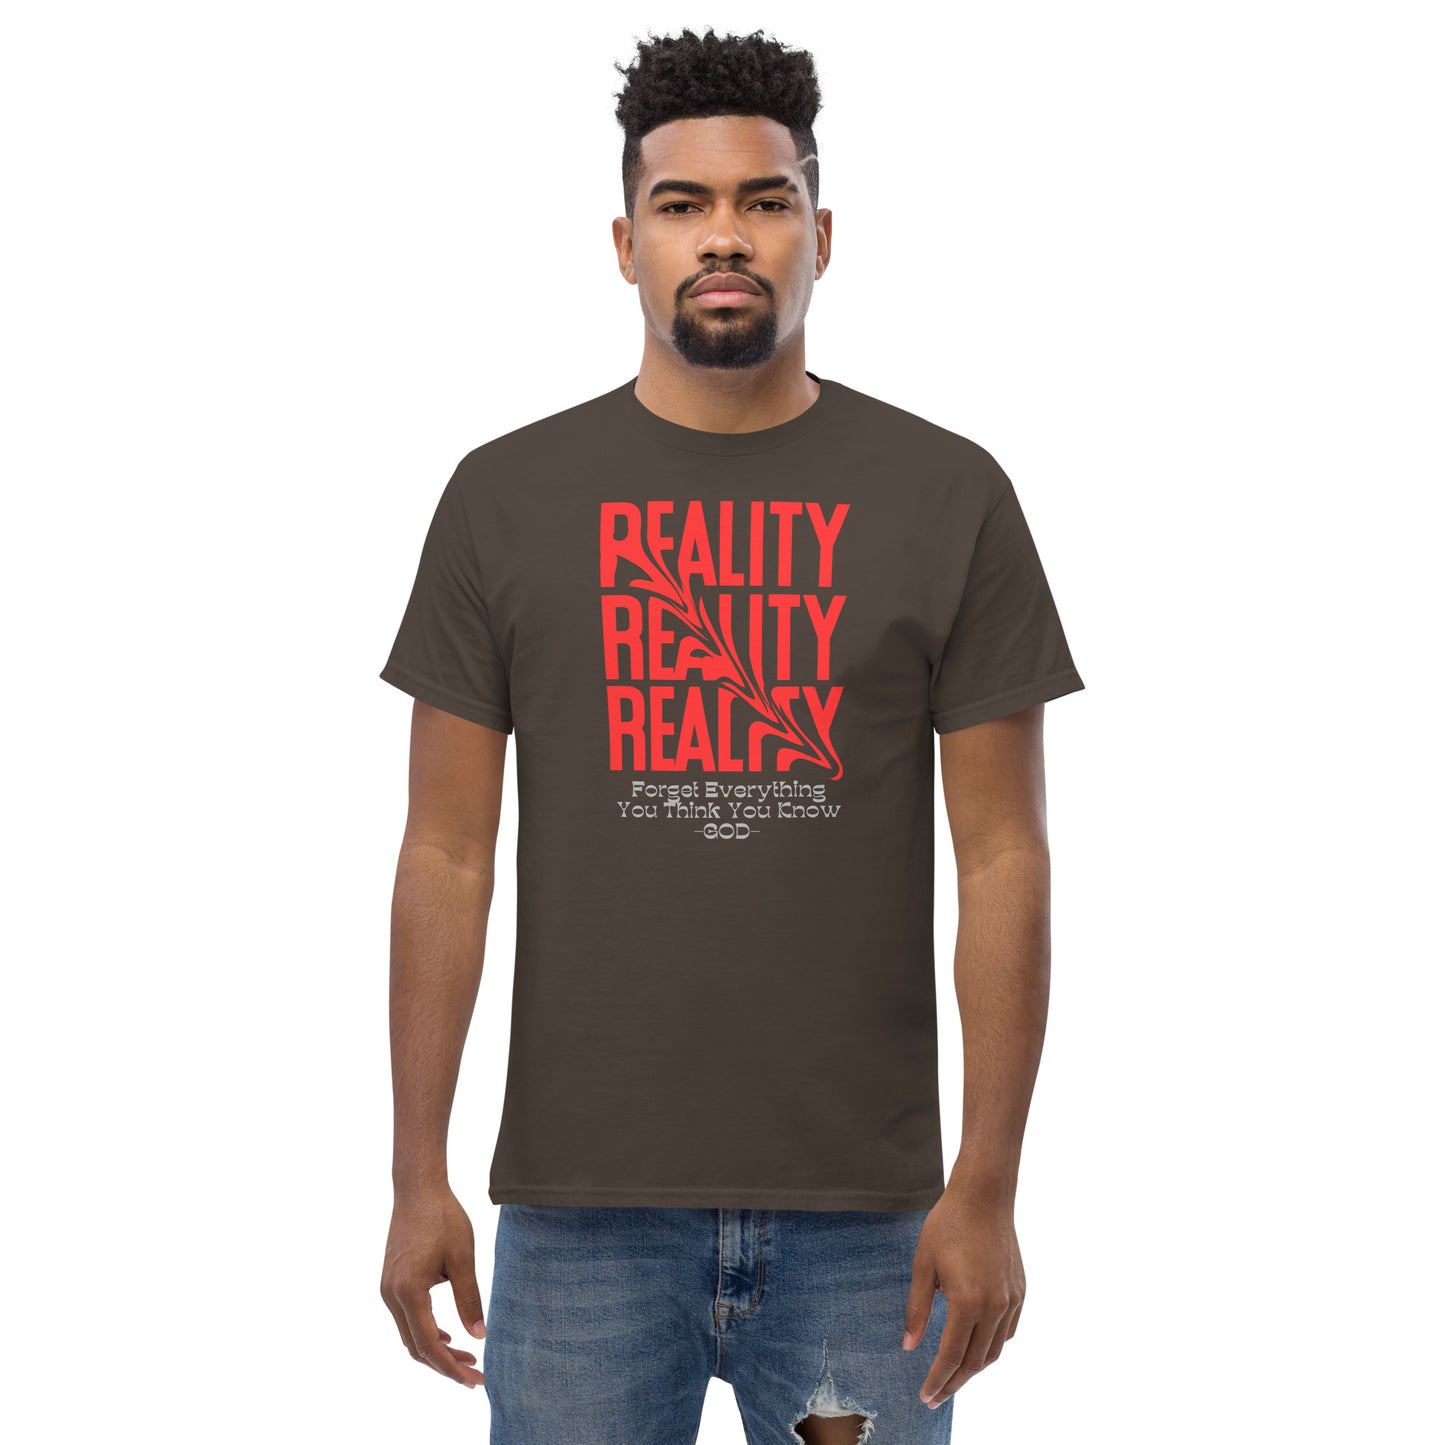 REALITY Forget Everything You Think You Know GOD Men's classic tee